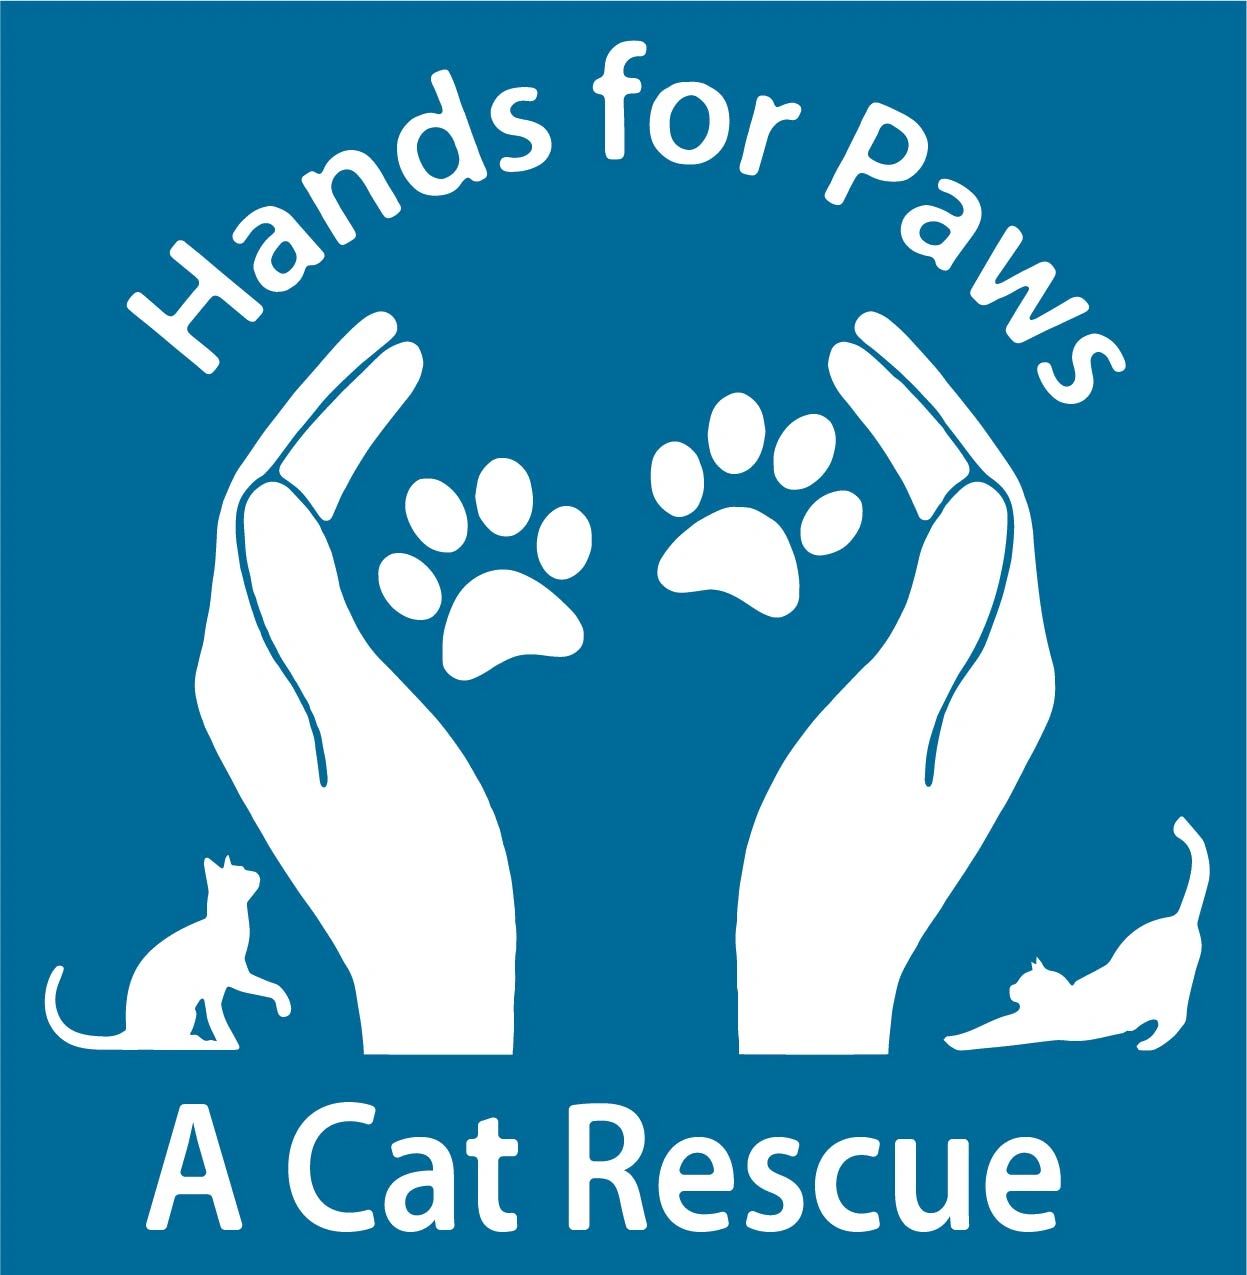 Hands for Paws - a Cat Rescue - Cats, Adopt a Pet, Cats, Kittens